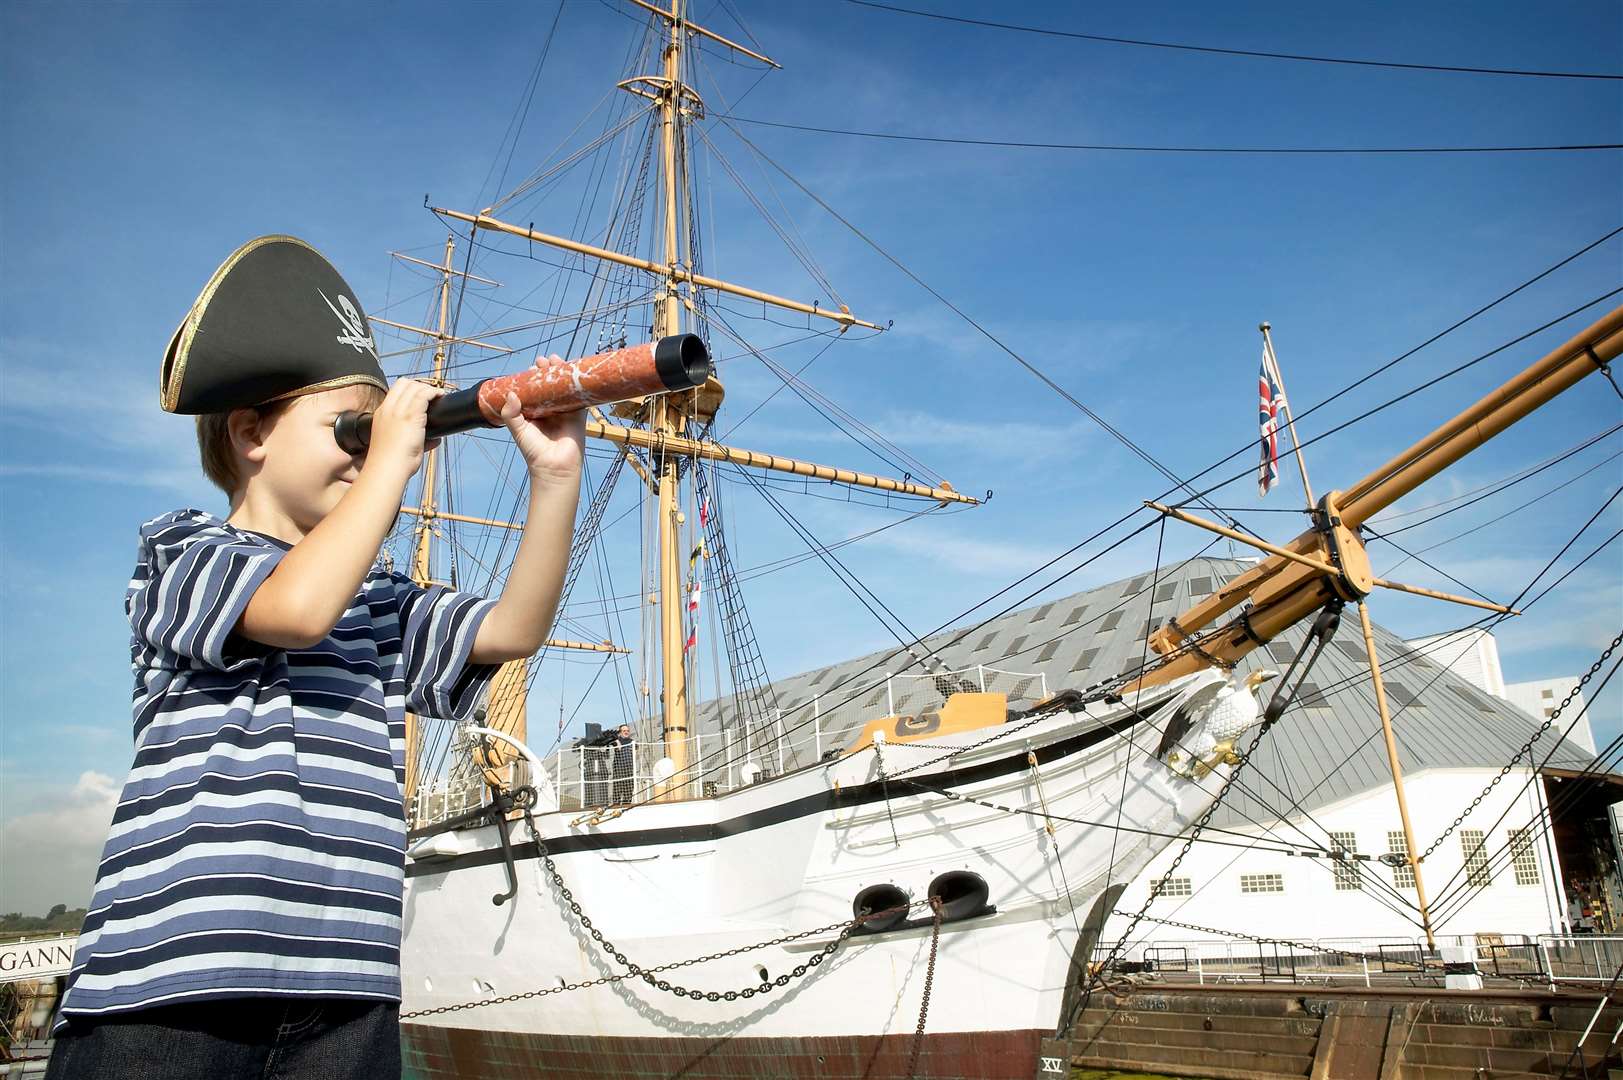 The Historic Dockyard Chatham is offering discounted tickets this summer